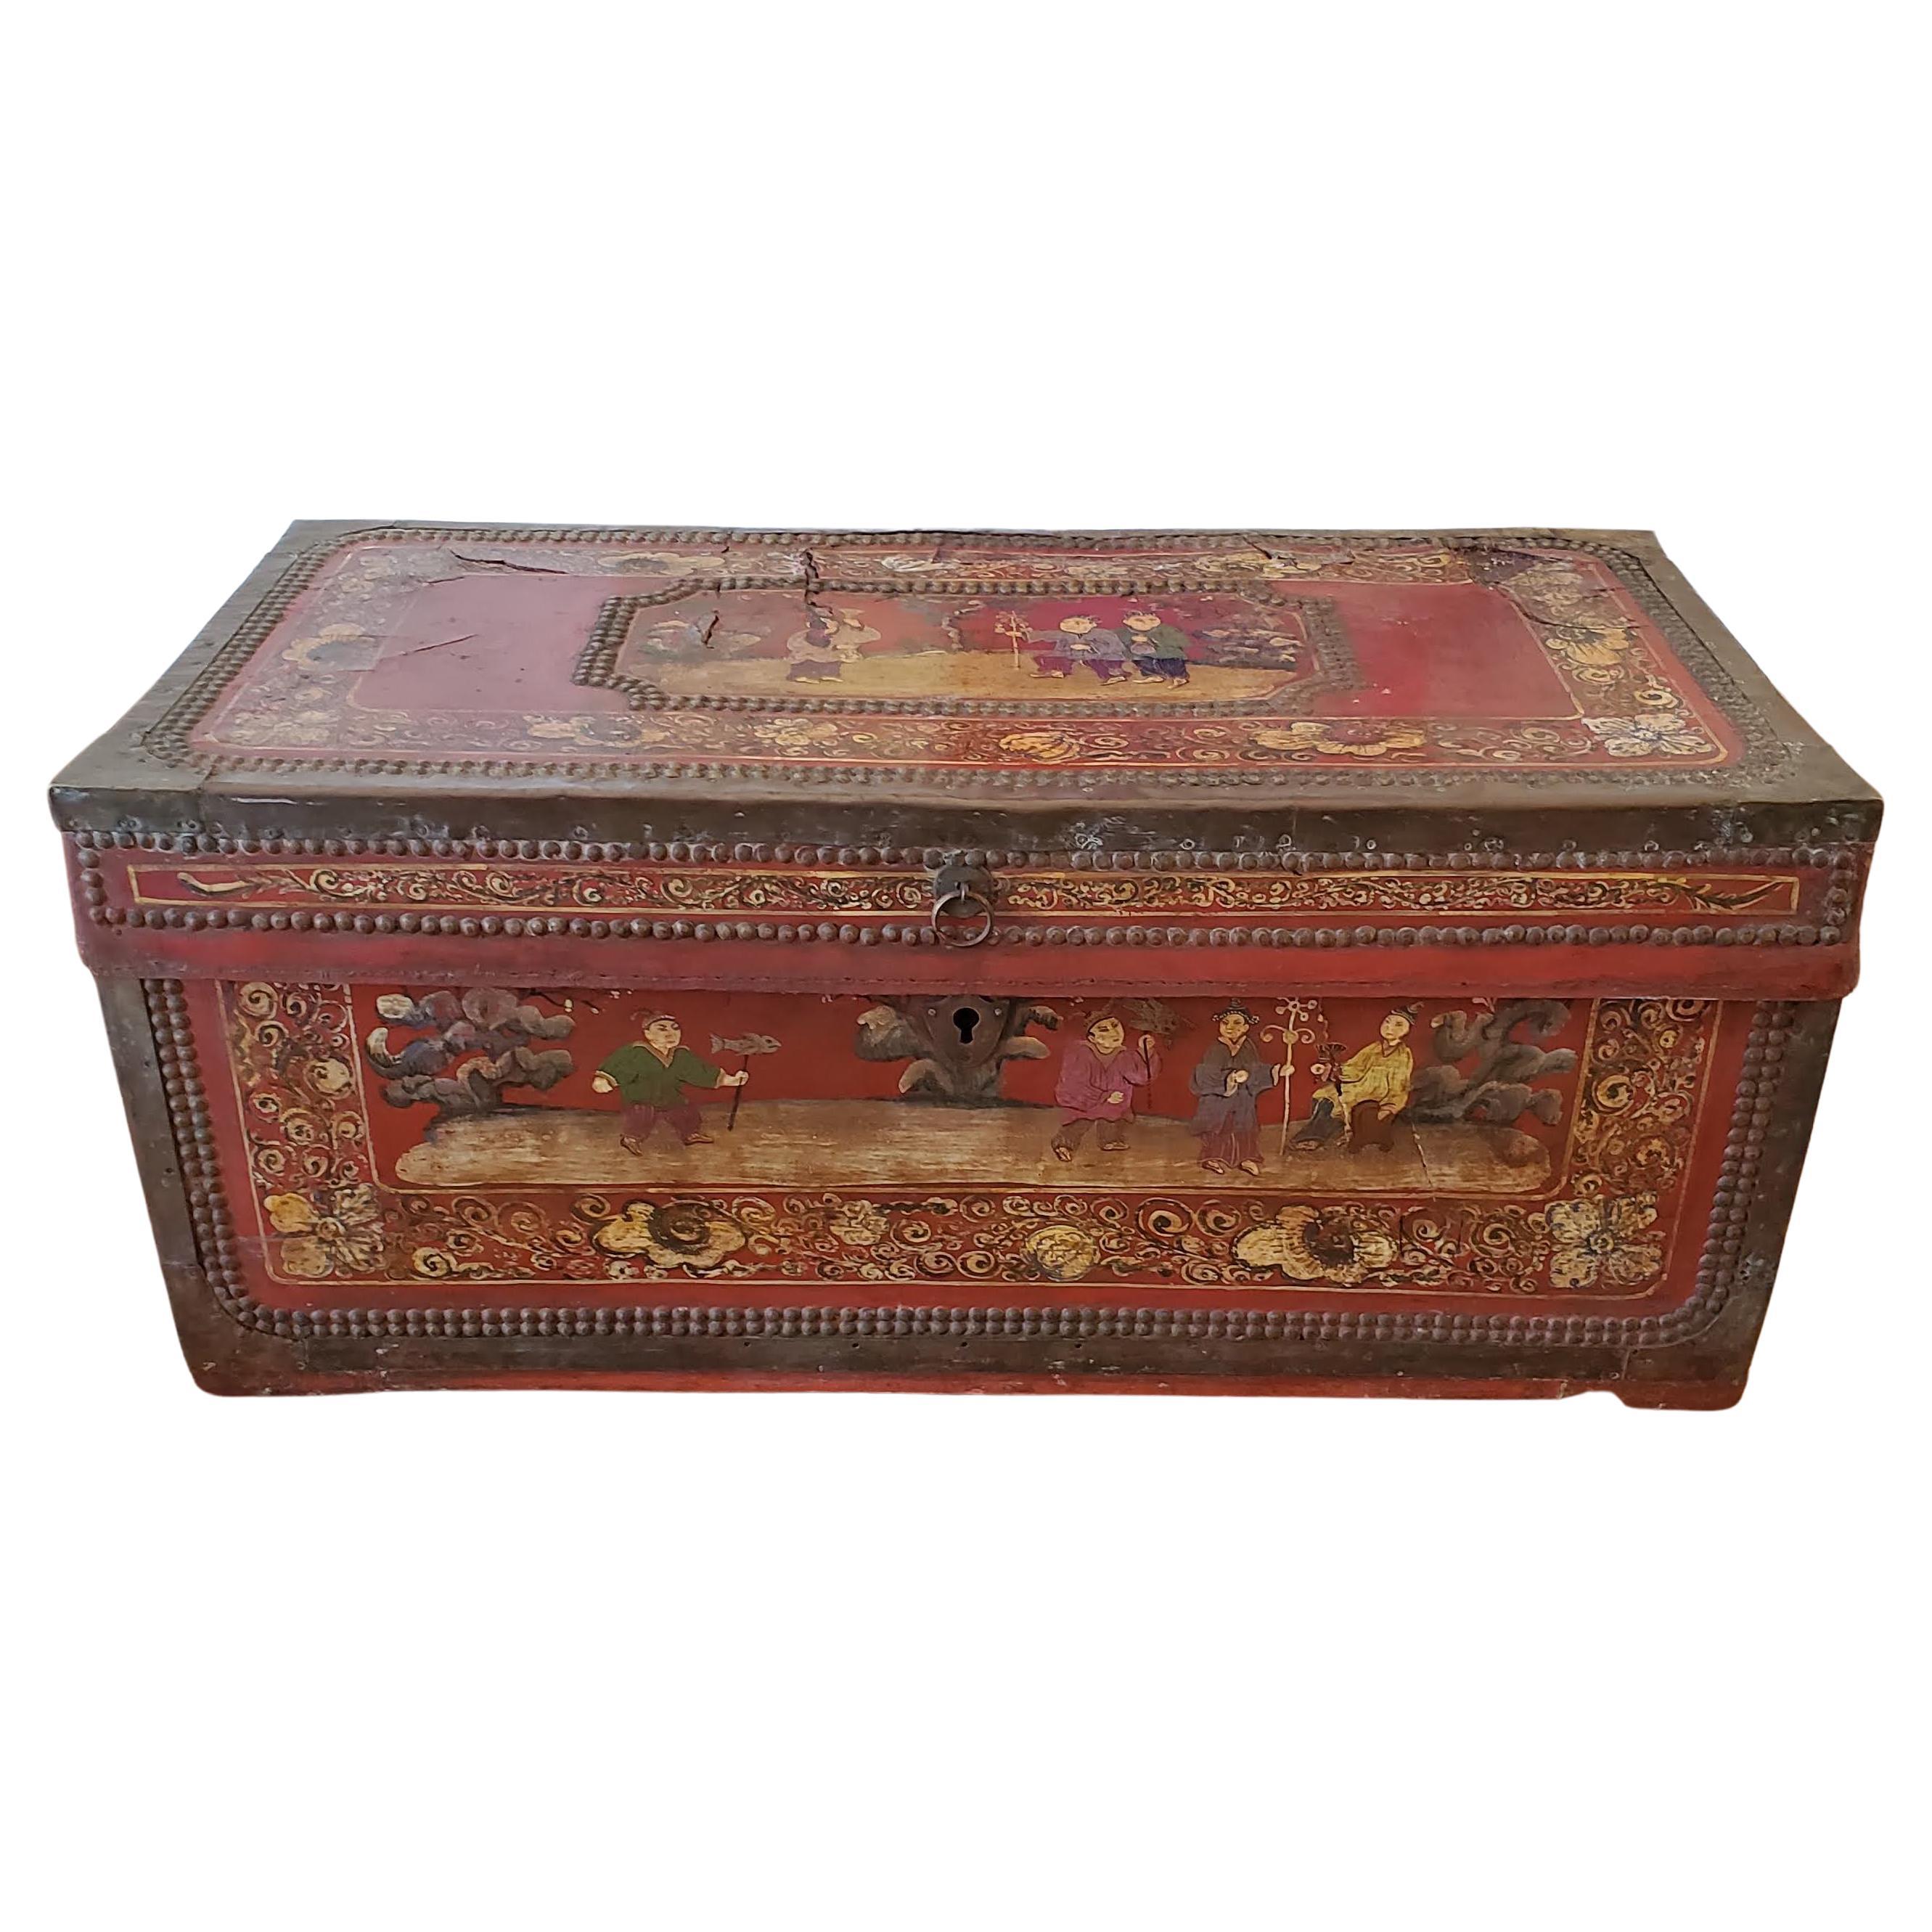 19th Century Chinese Export Brass Bound Leather Trunk with Hand Painted Designs